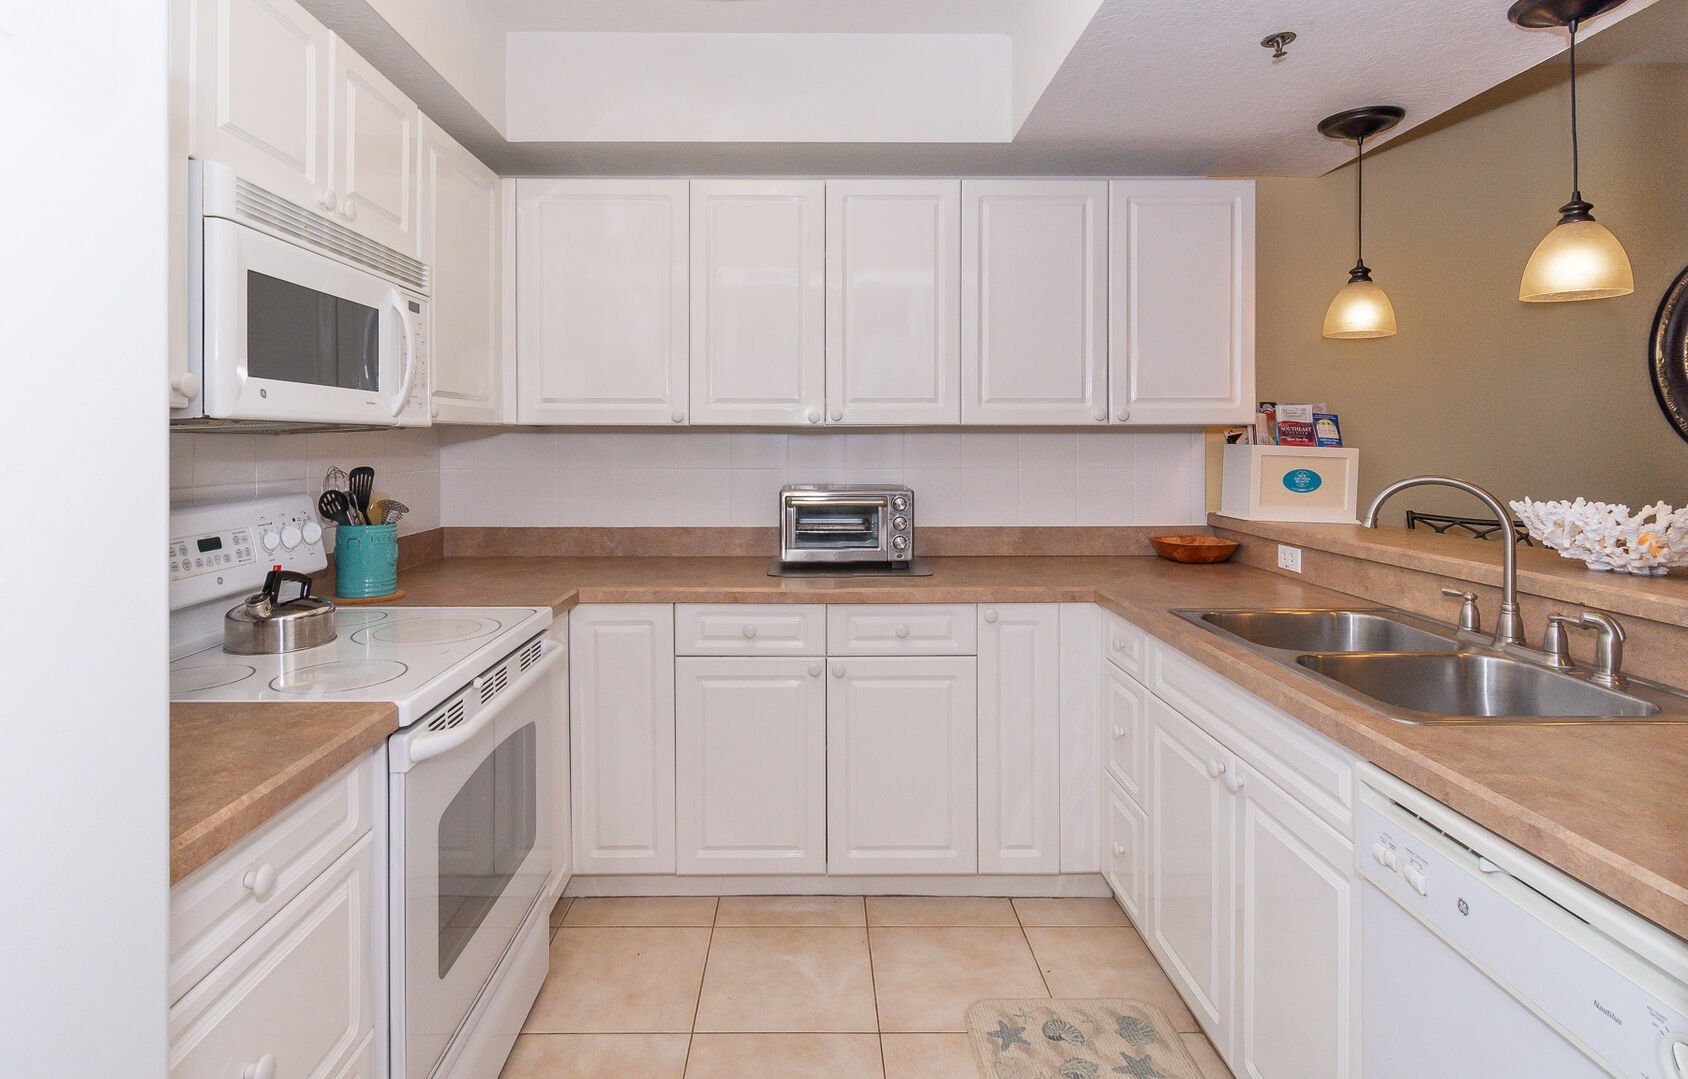 Full view of the kitchen in our condo rental in New Smyrna Beach